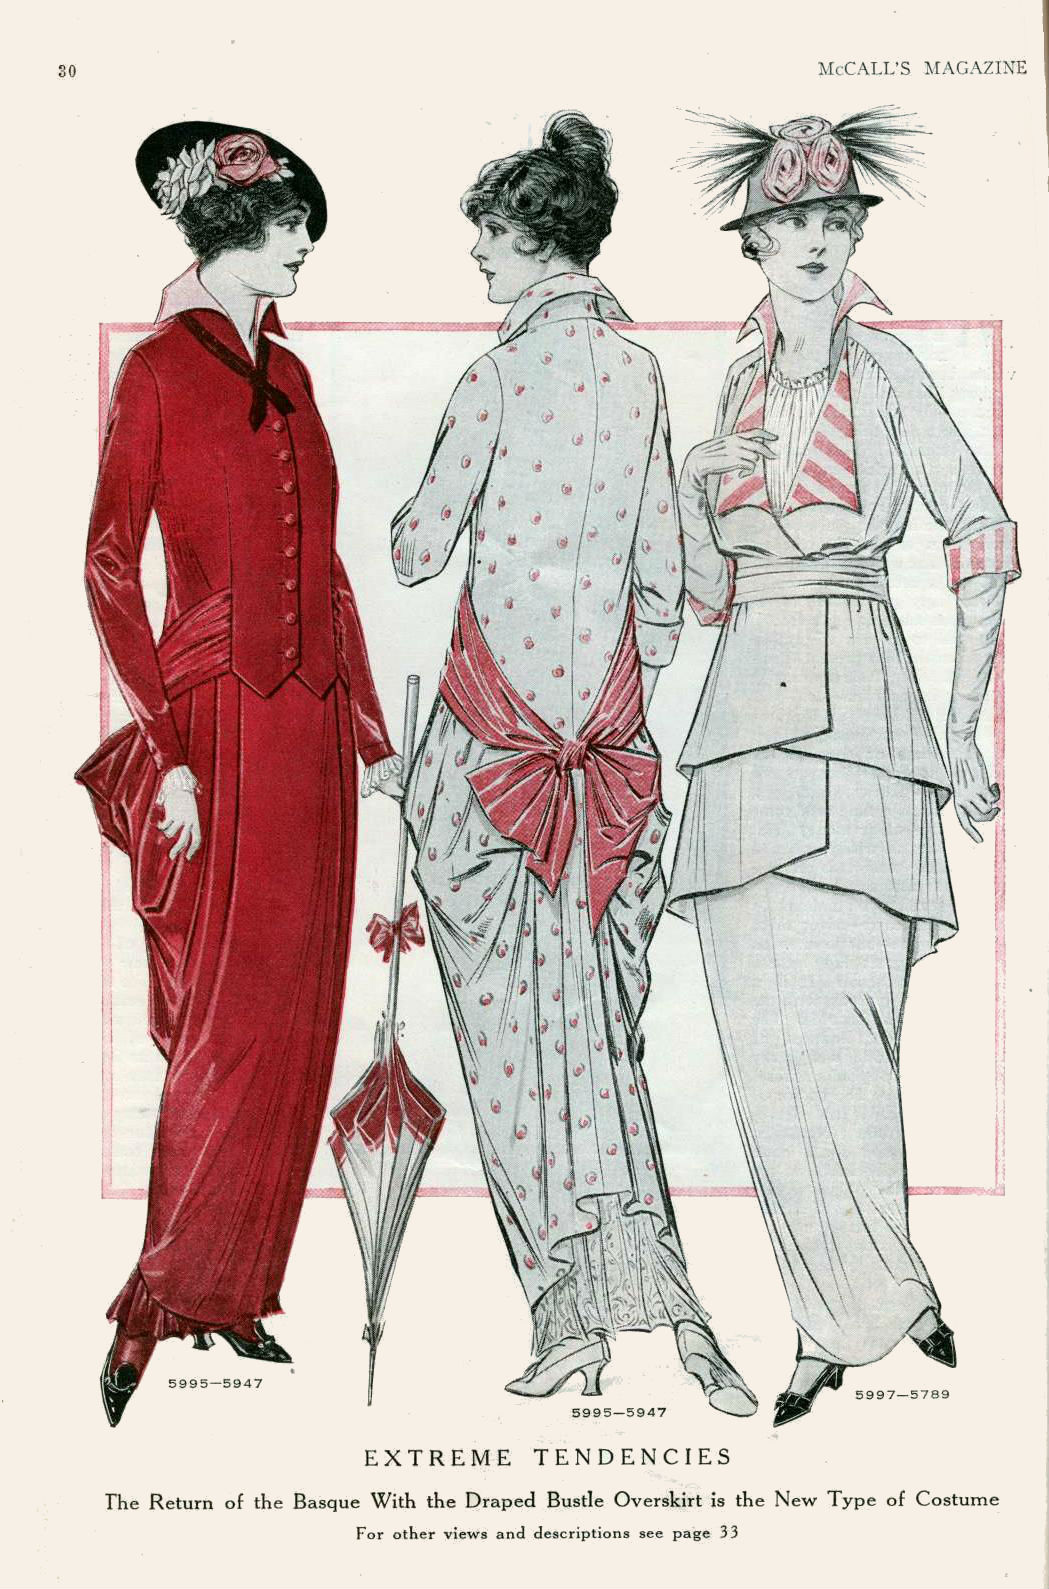 Vintage Fashion Plates from 1914